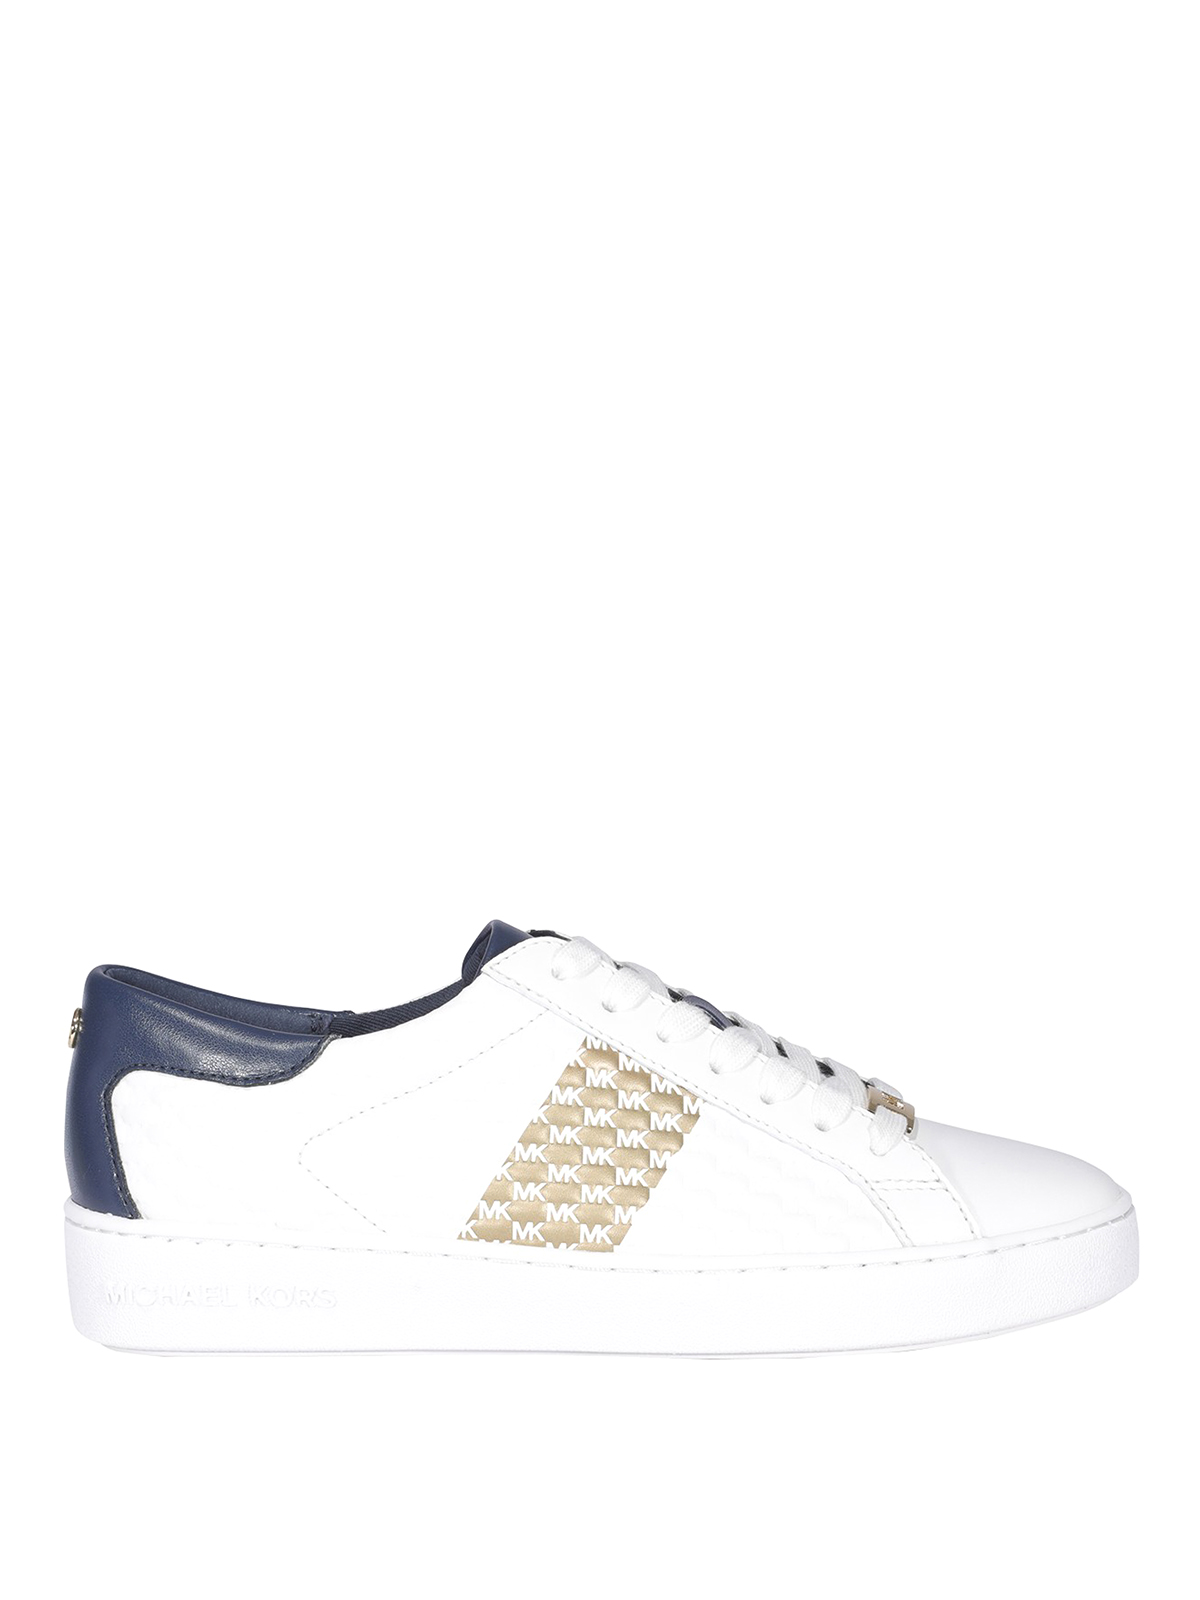 MICHAEL KORS COLBY trainers